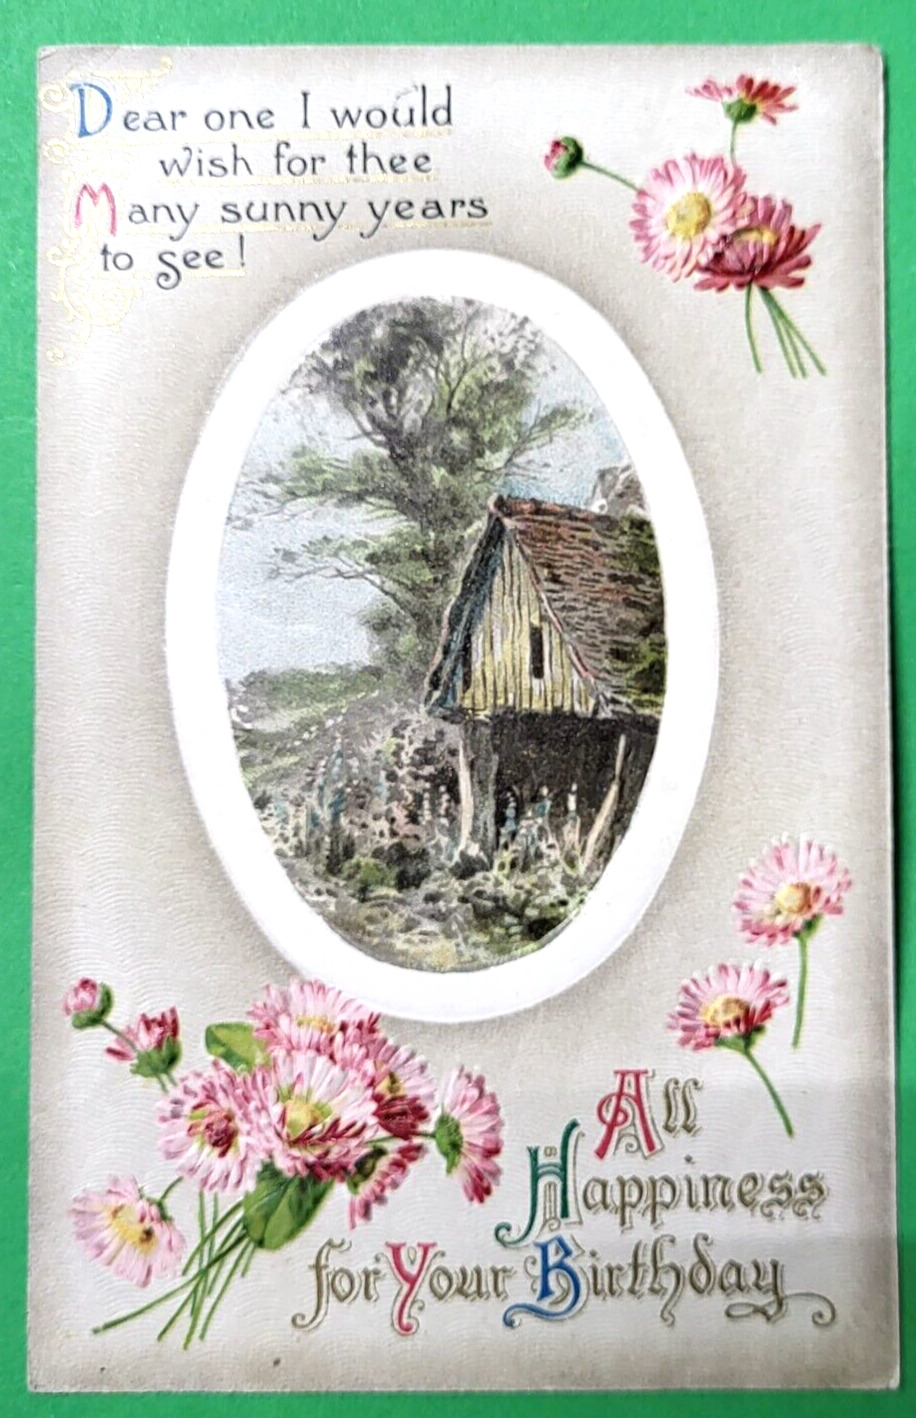 All Happiness for your Birthday postcard posted 1910 Embossed Flowers cabin art